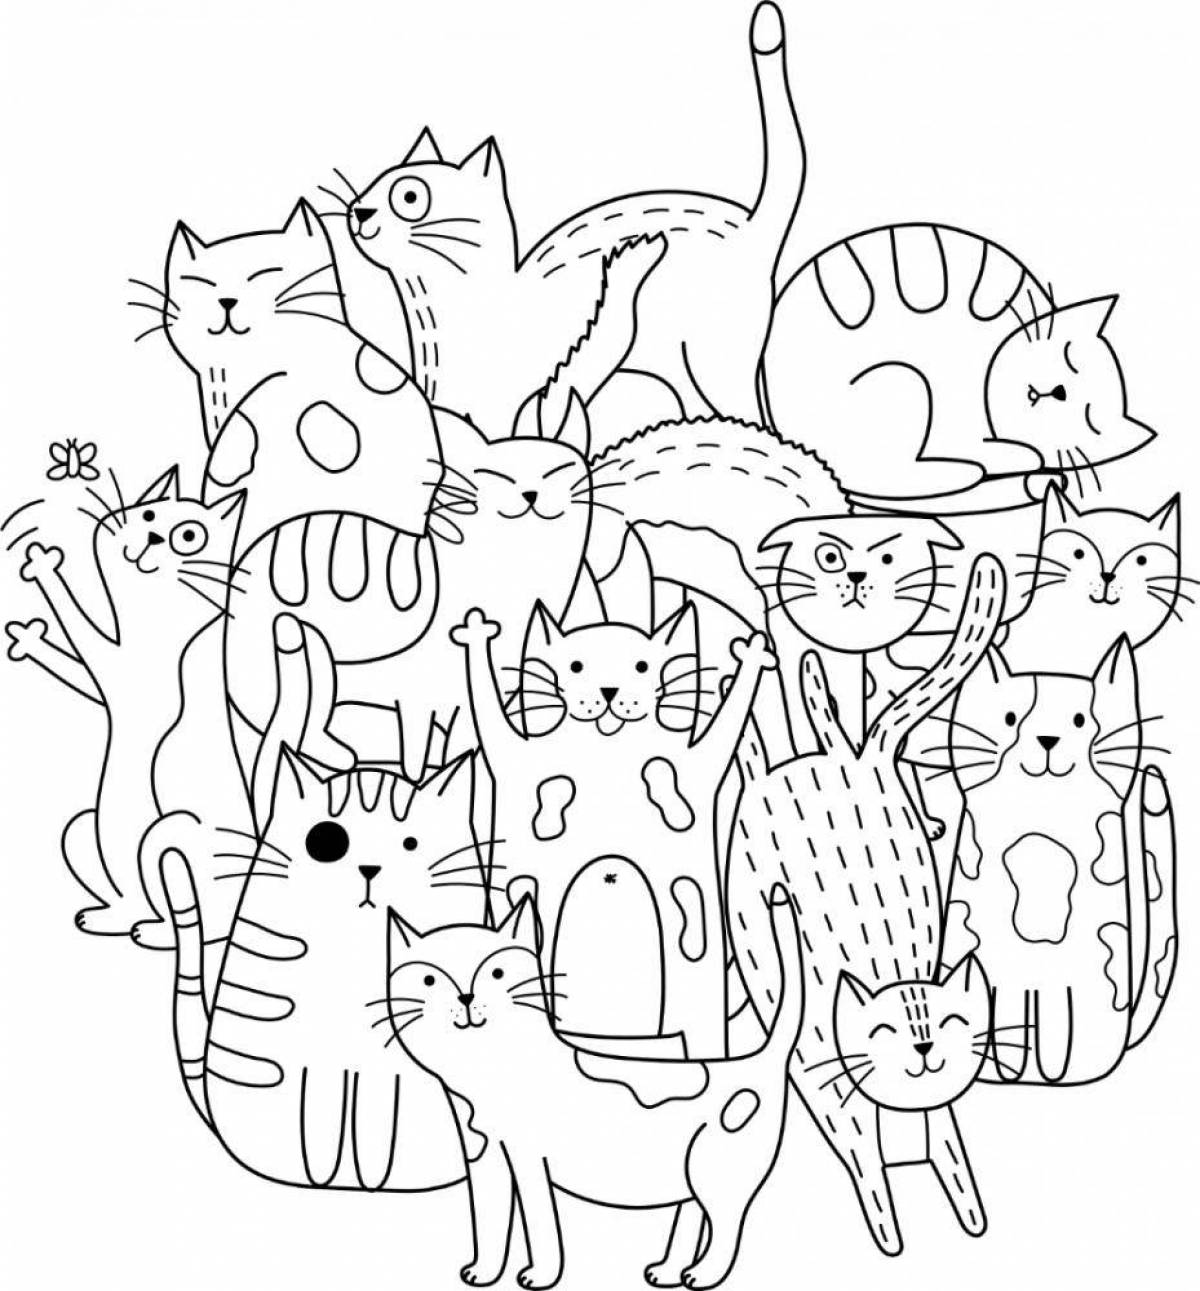 Snuggly-cute kittens coloring page